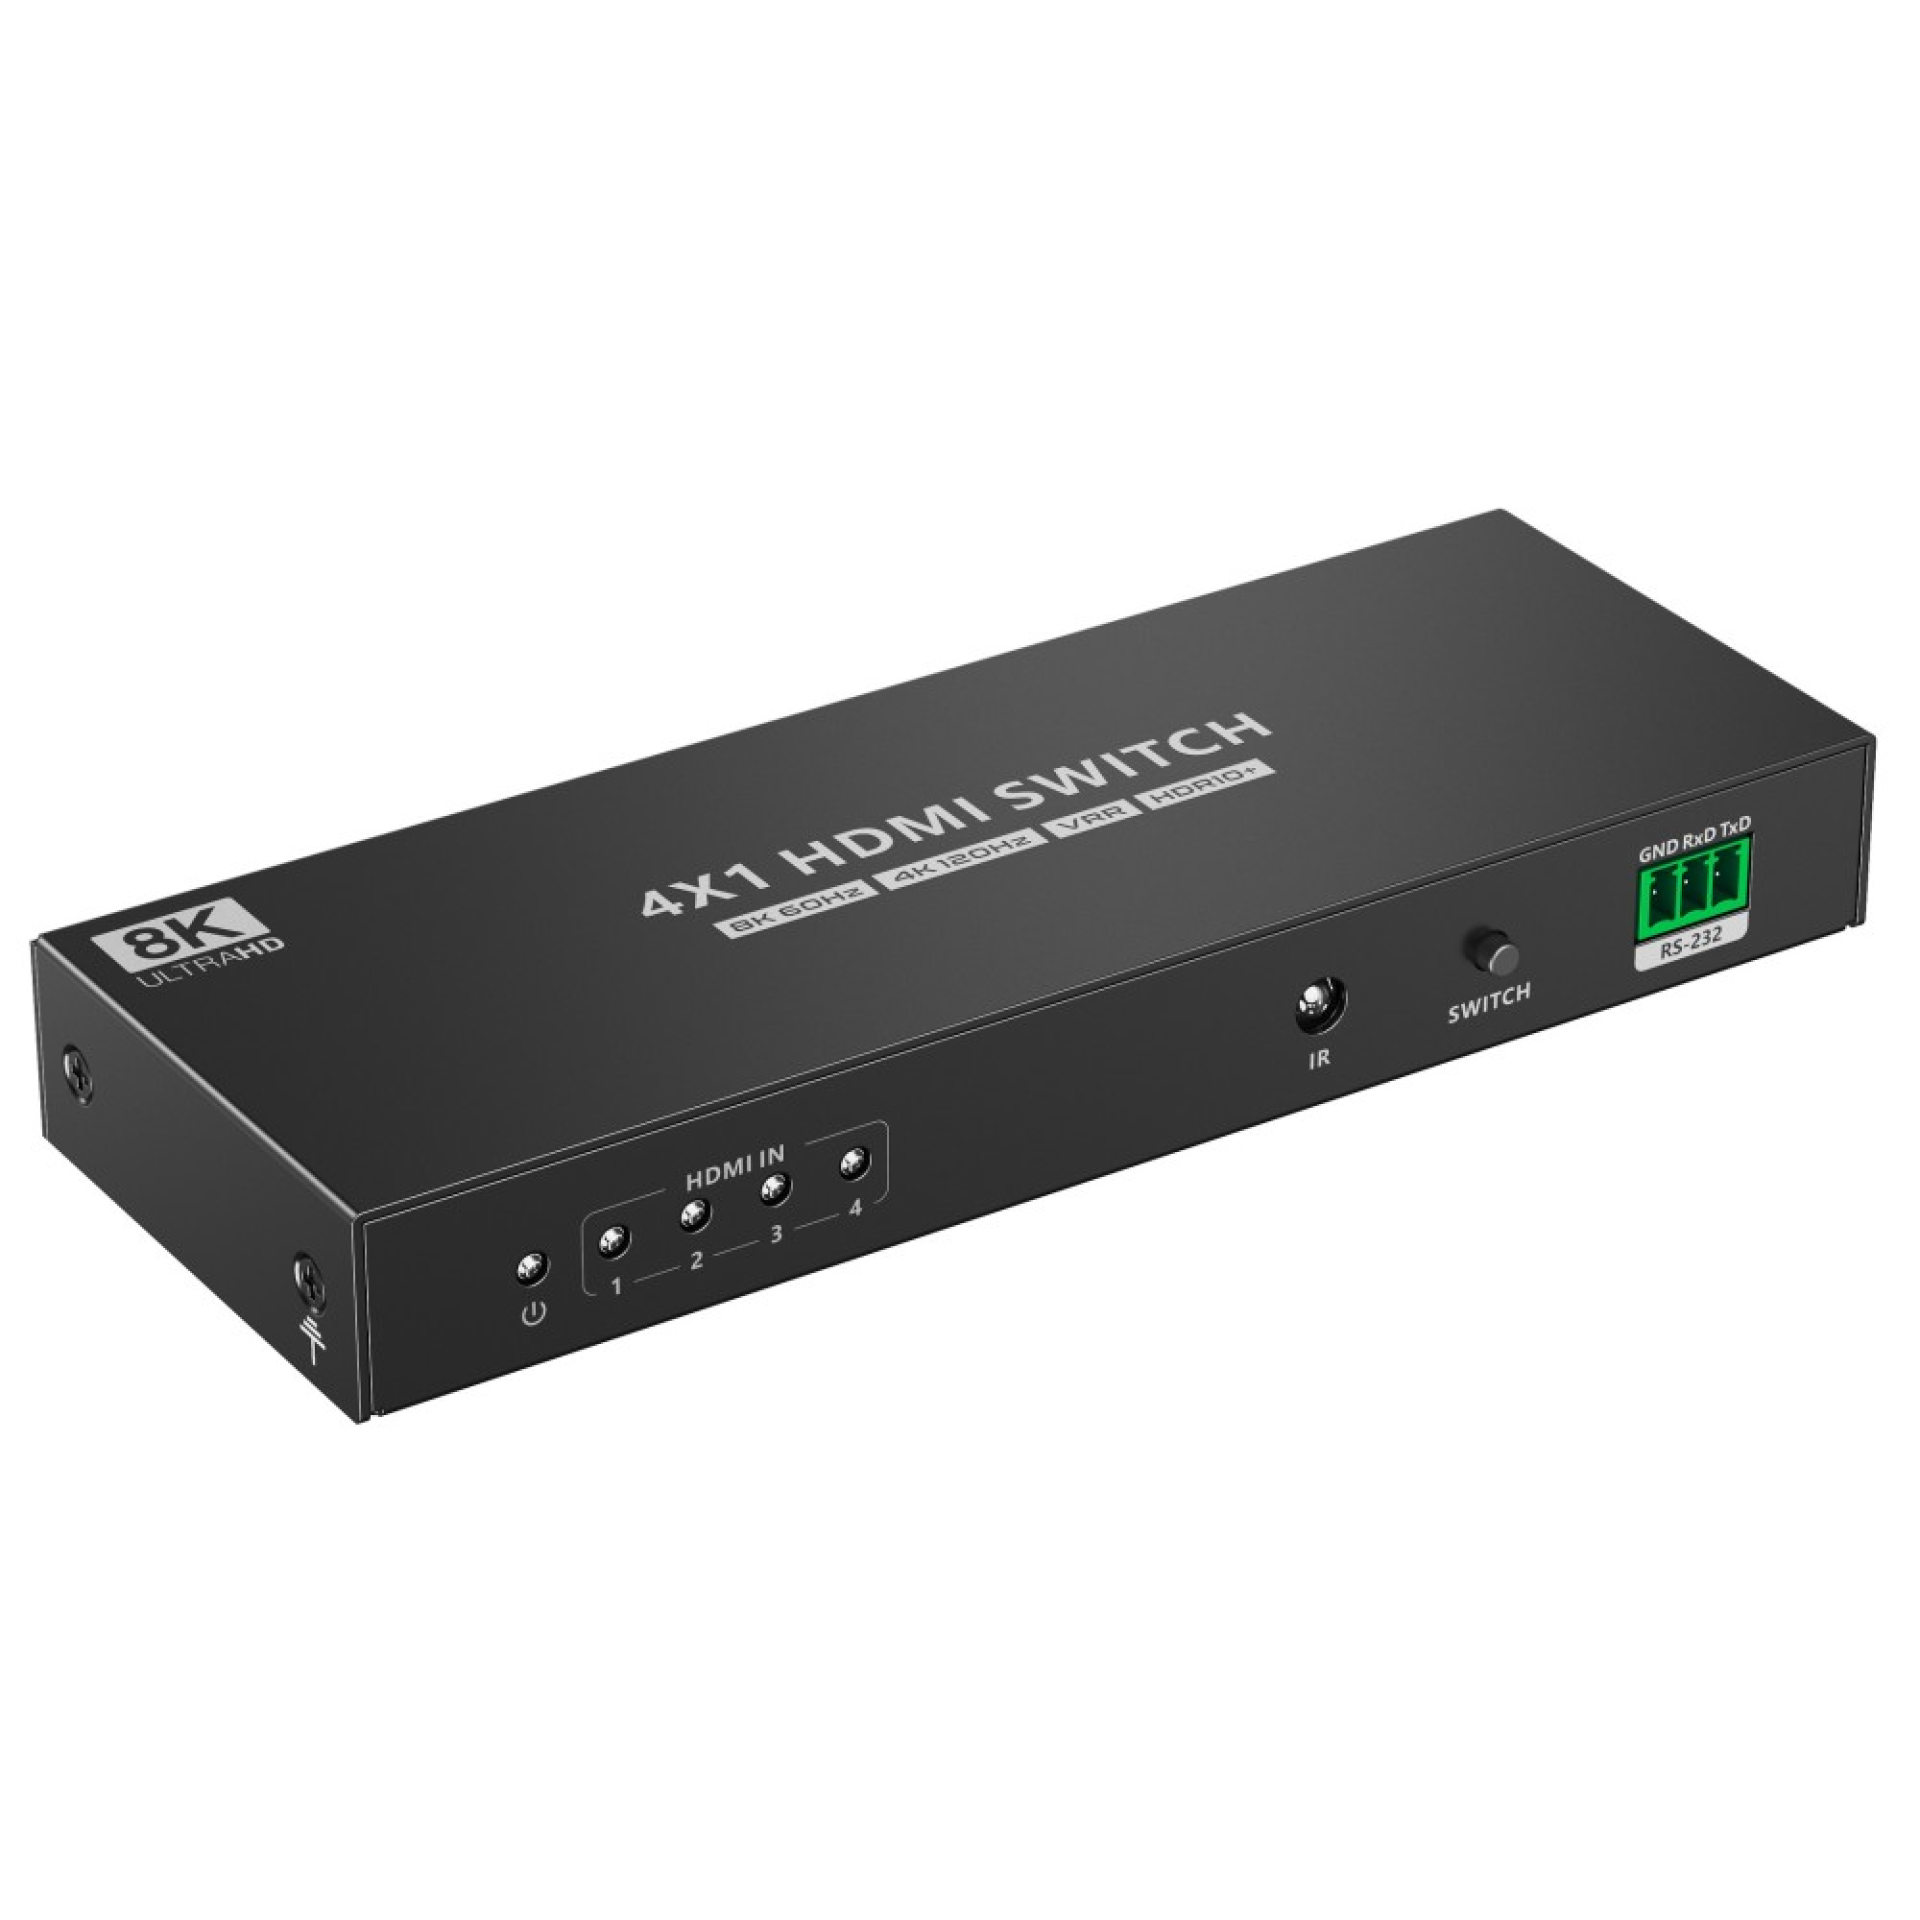 Techly 4x1 HDMI 2.1 8K 3D Switch with optical SPDIF